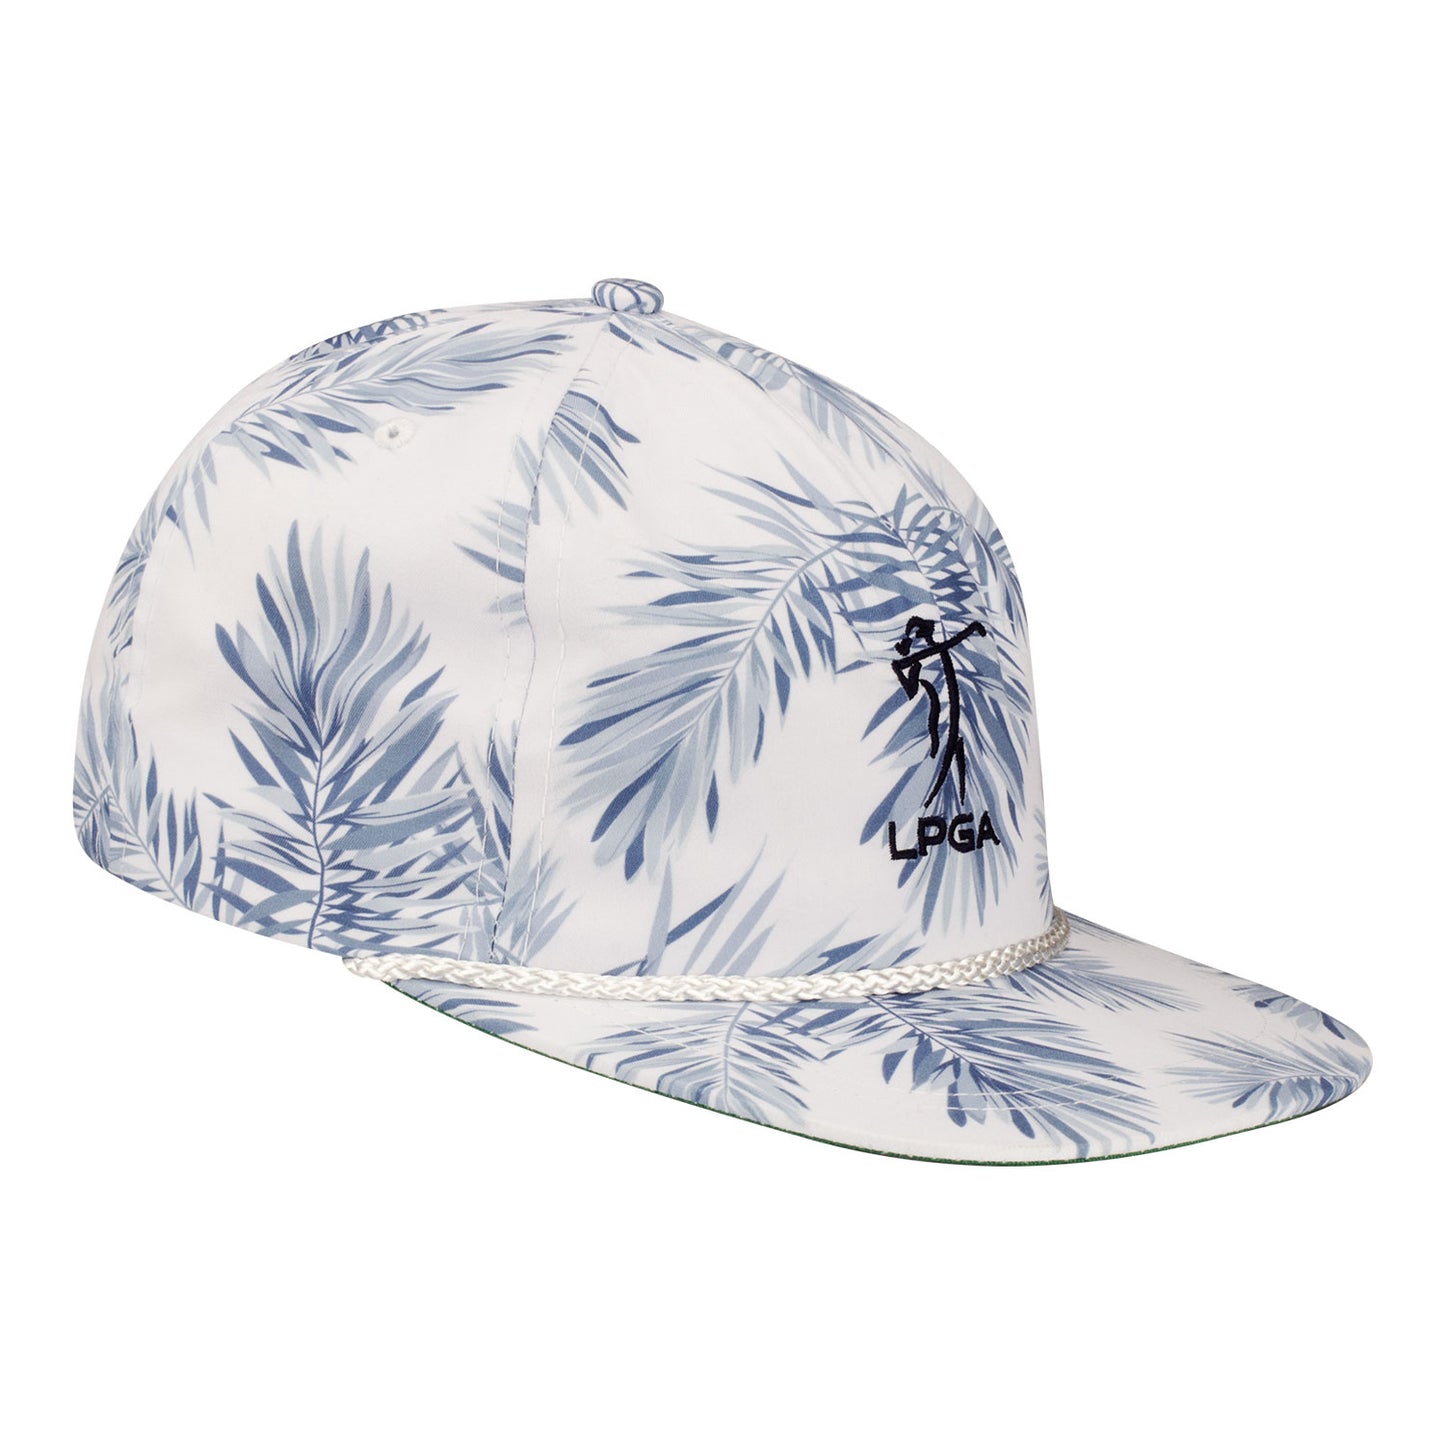 Imperial LPGA 5-Panel Hat in White and Blue - Angled Right Side View